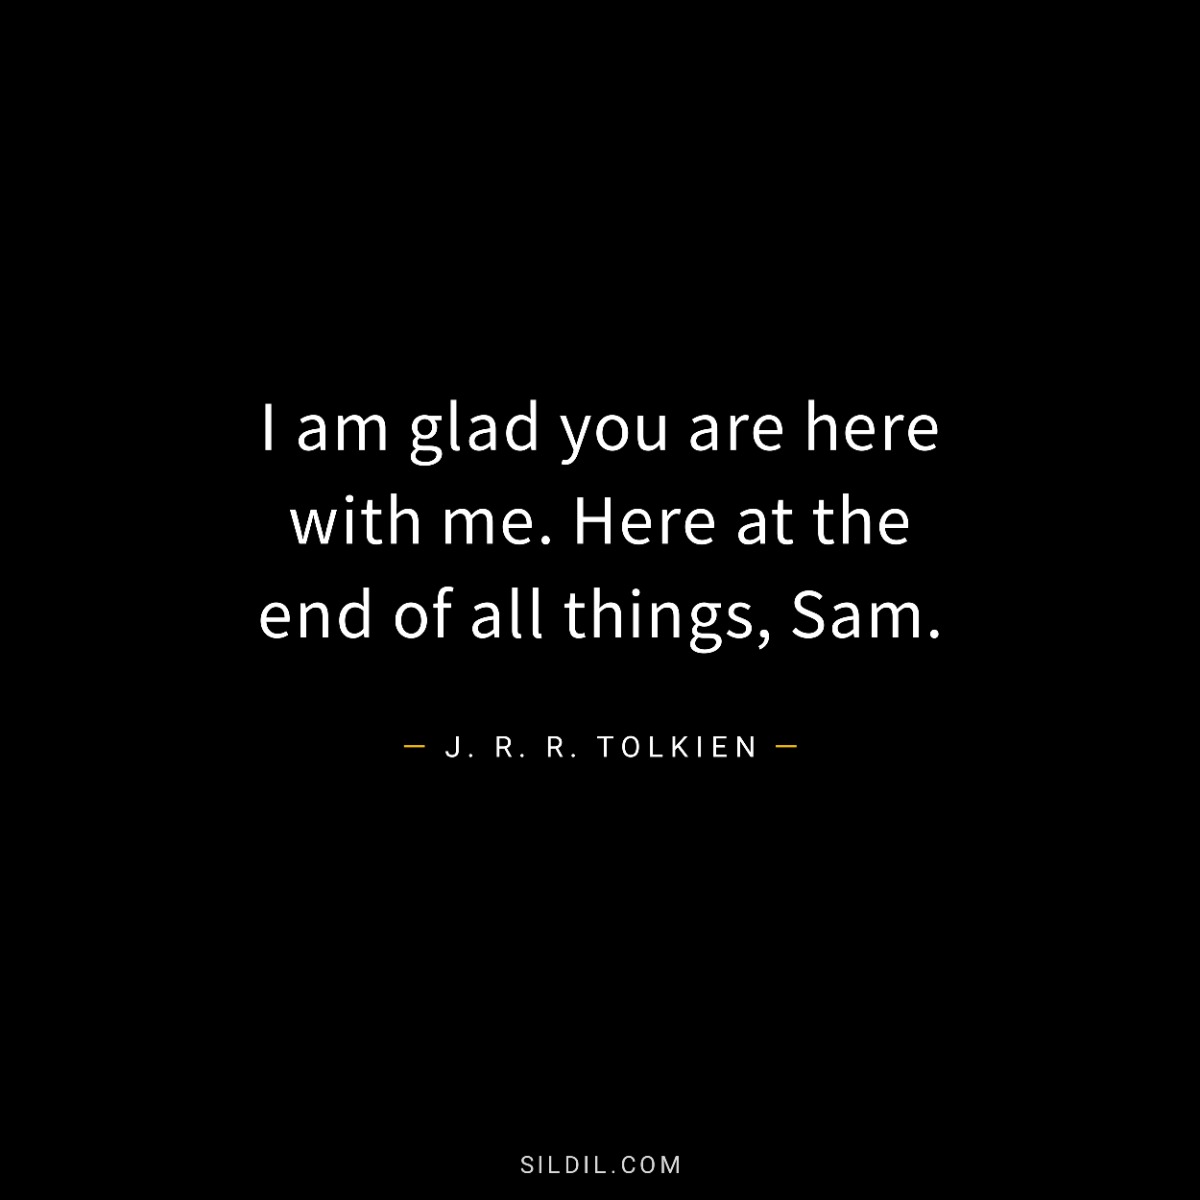 I am glad you are here with me. Here at the end of all things, Sam.